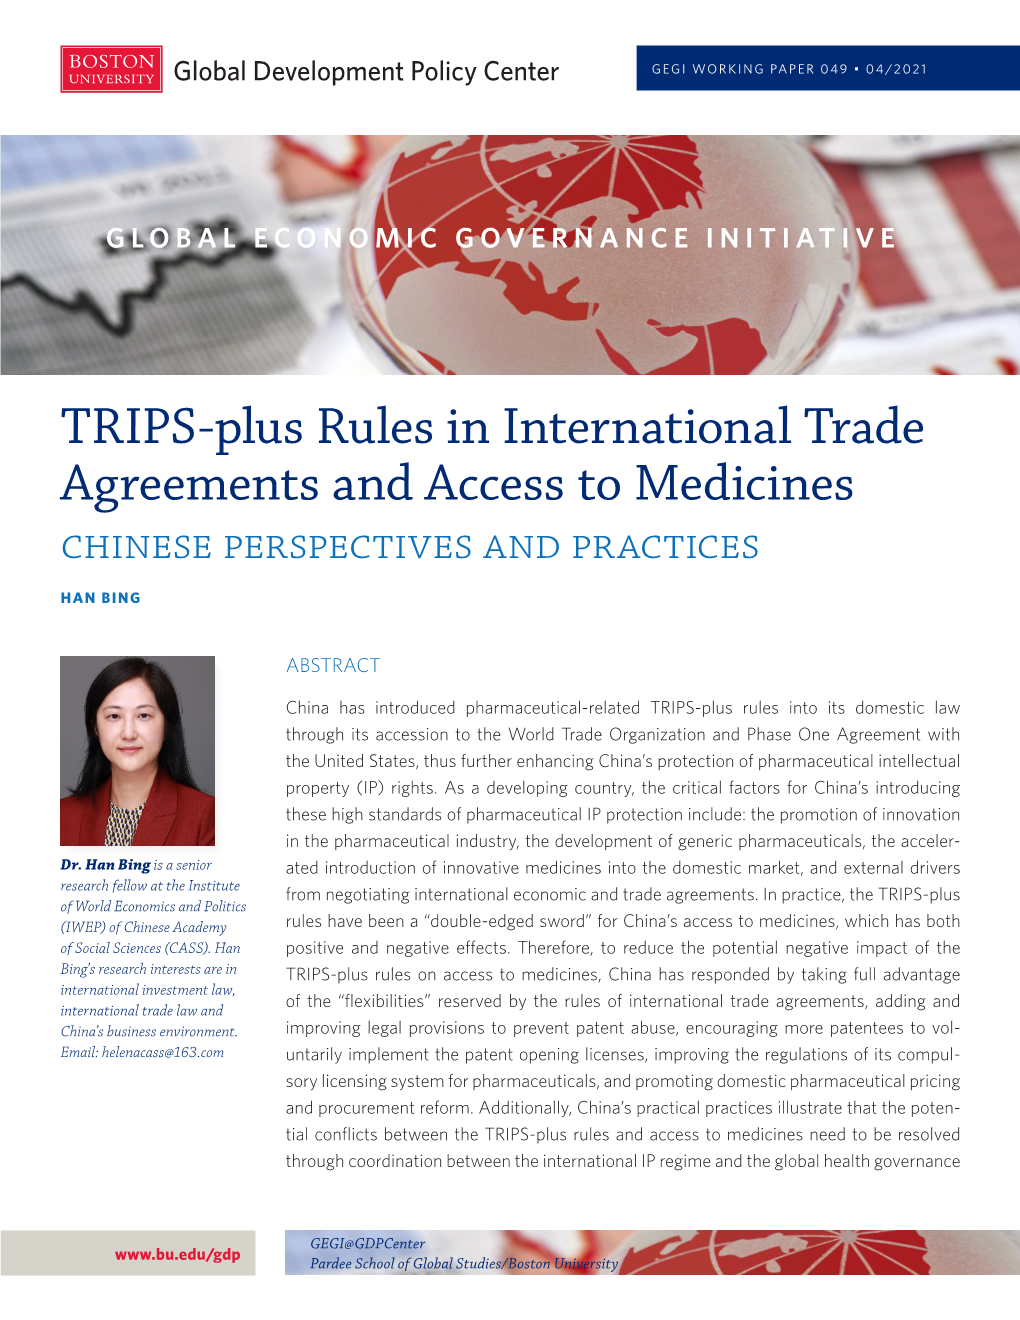 TRIPS-Plus Rules in International Trade Agreements and Access to Medicines Chinese Perspectives and Practices